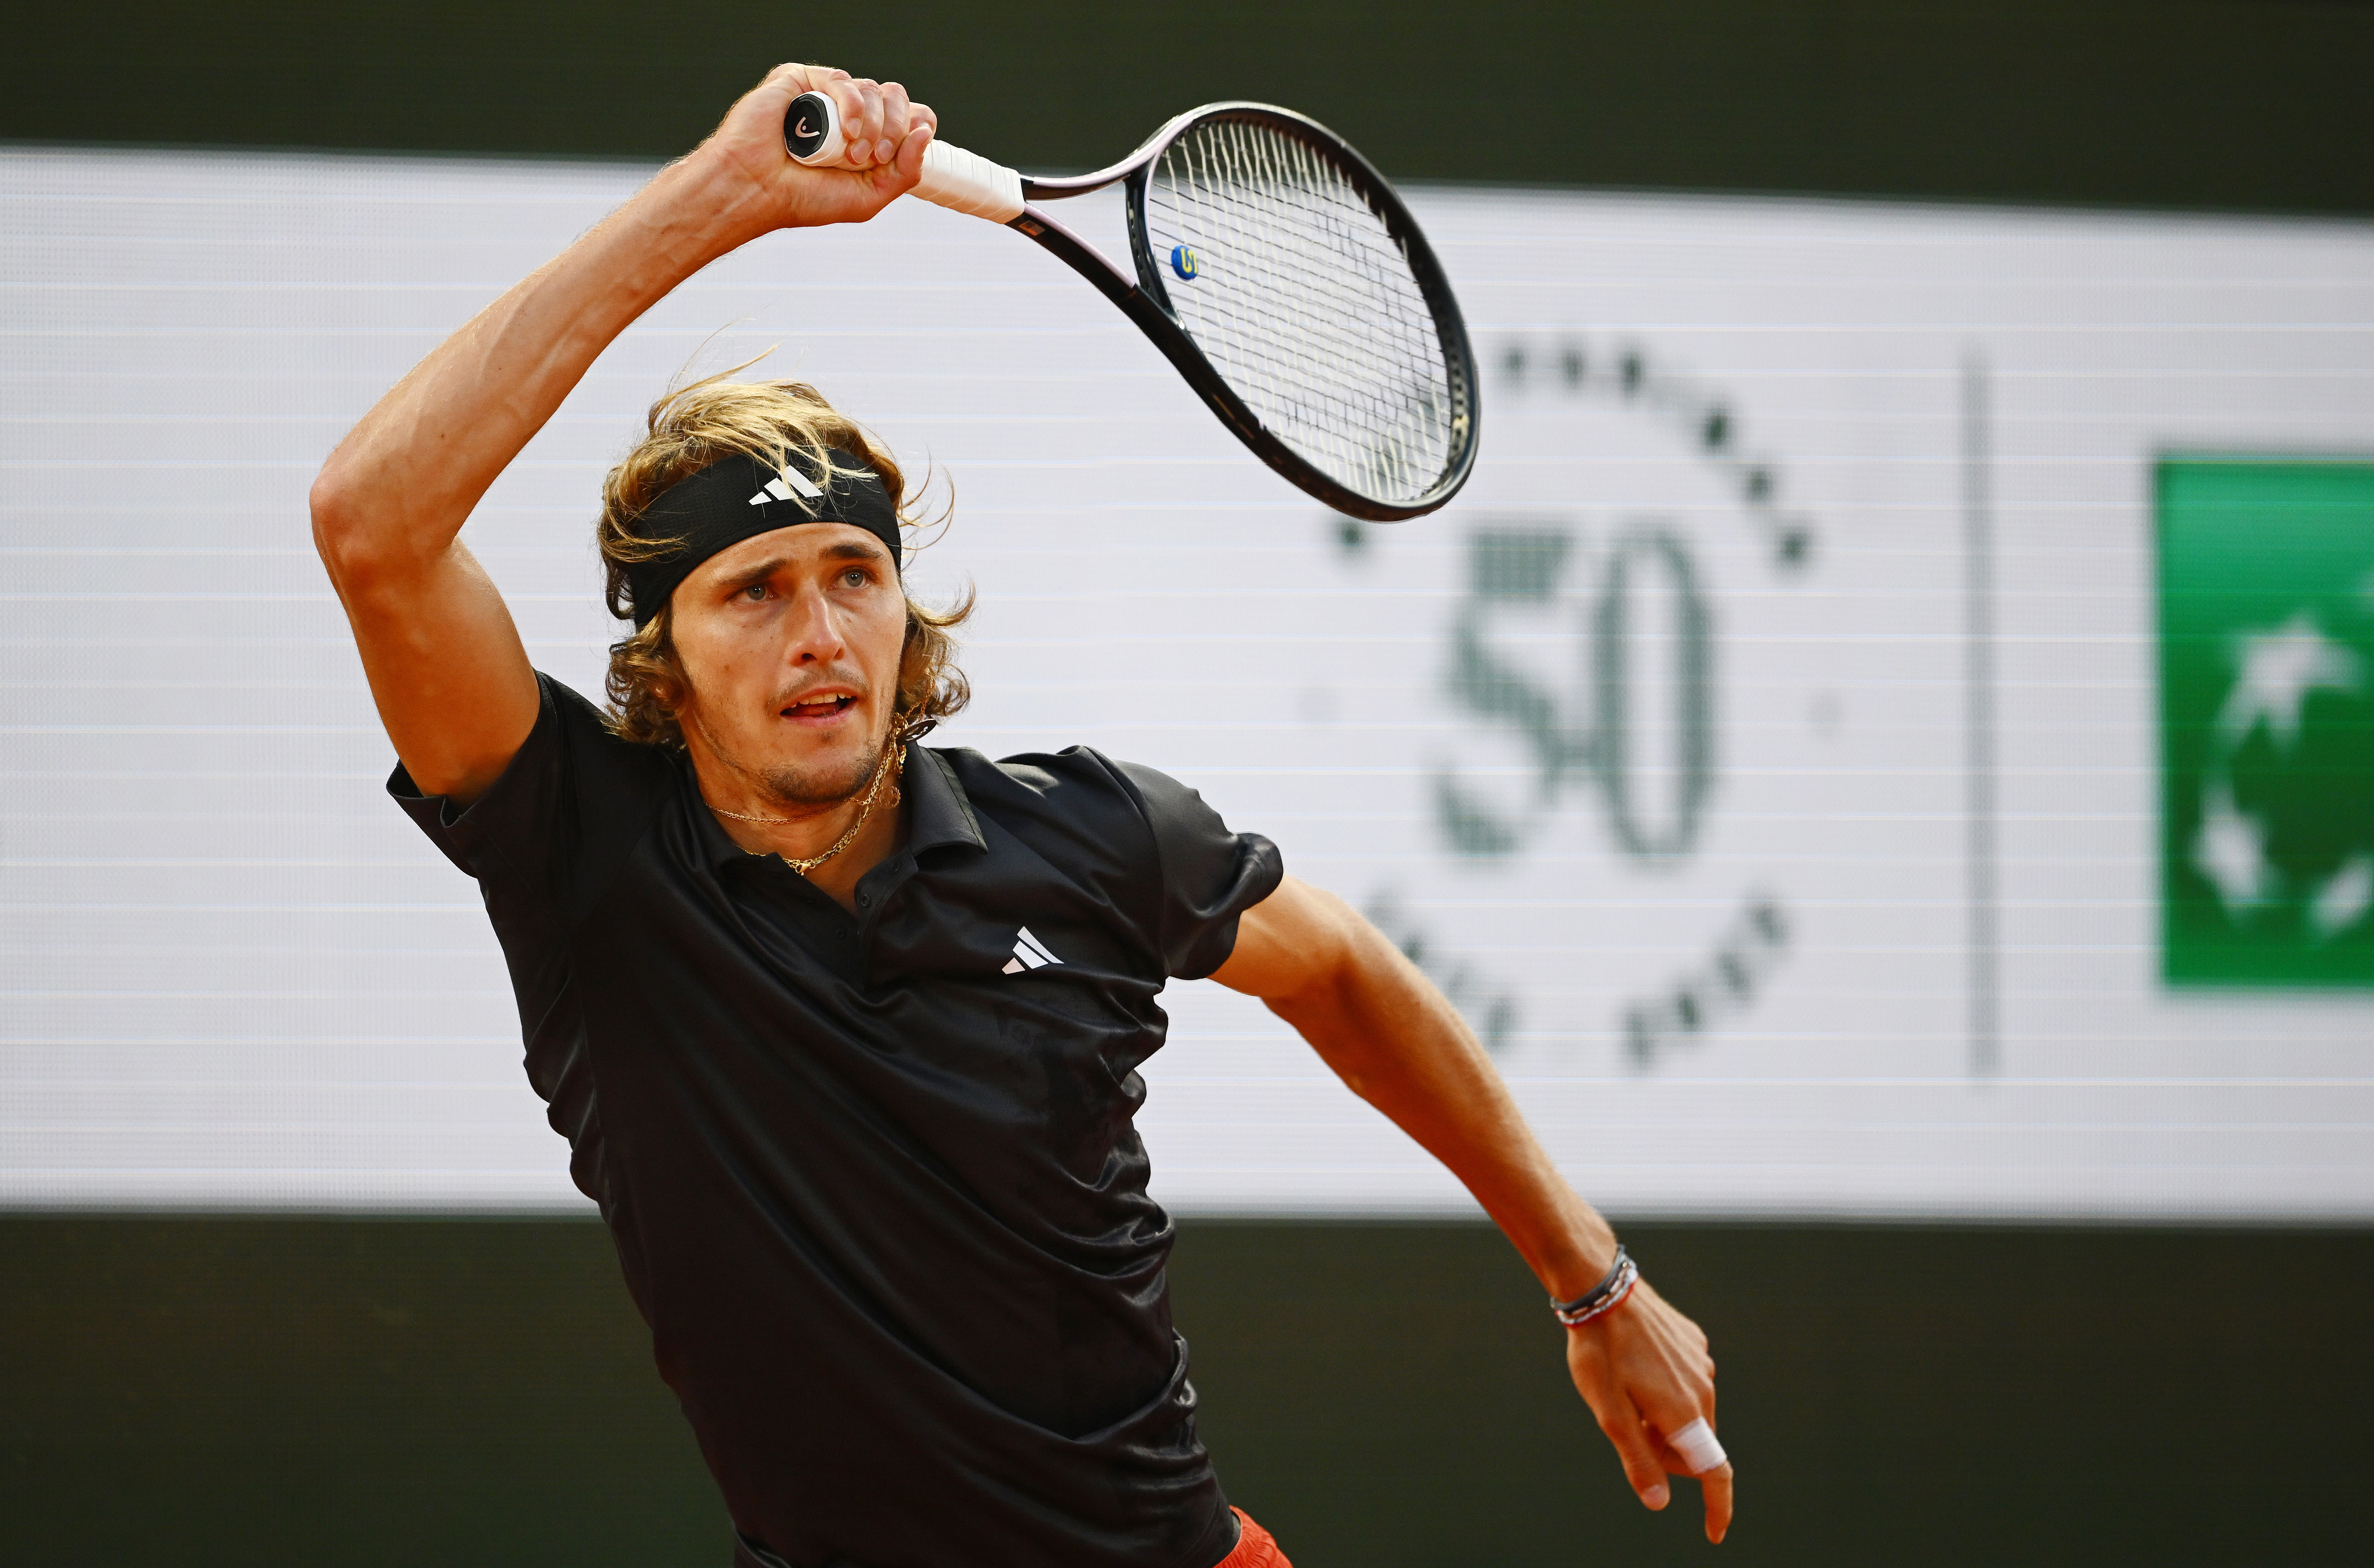 Quote of the Day Alexander Zverev opens up about diabetes struggles at Roland Garros